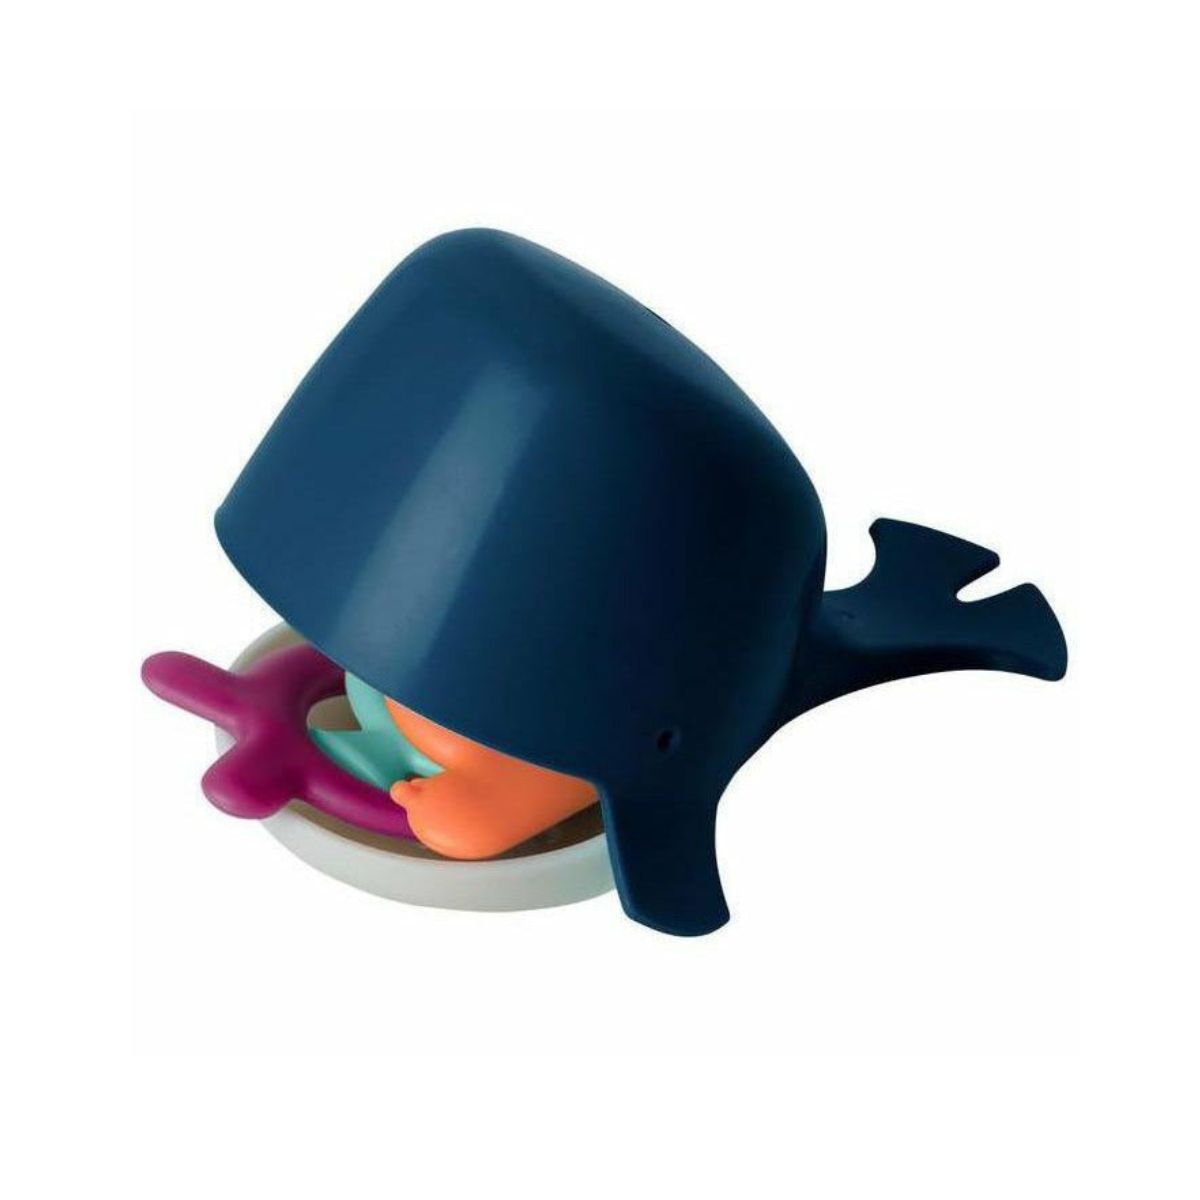 Boon - Jellies Kids Bath Toy, Navy and Coral